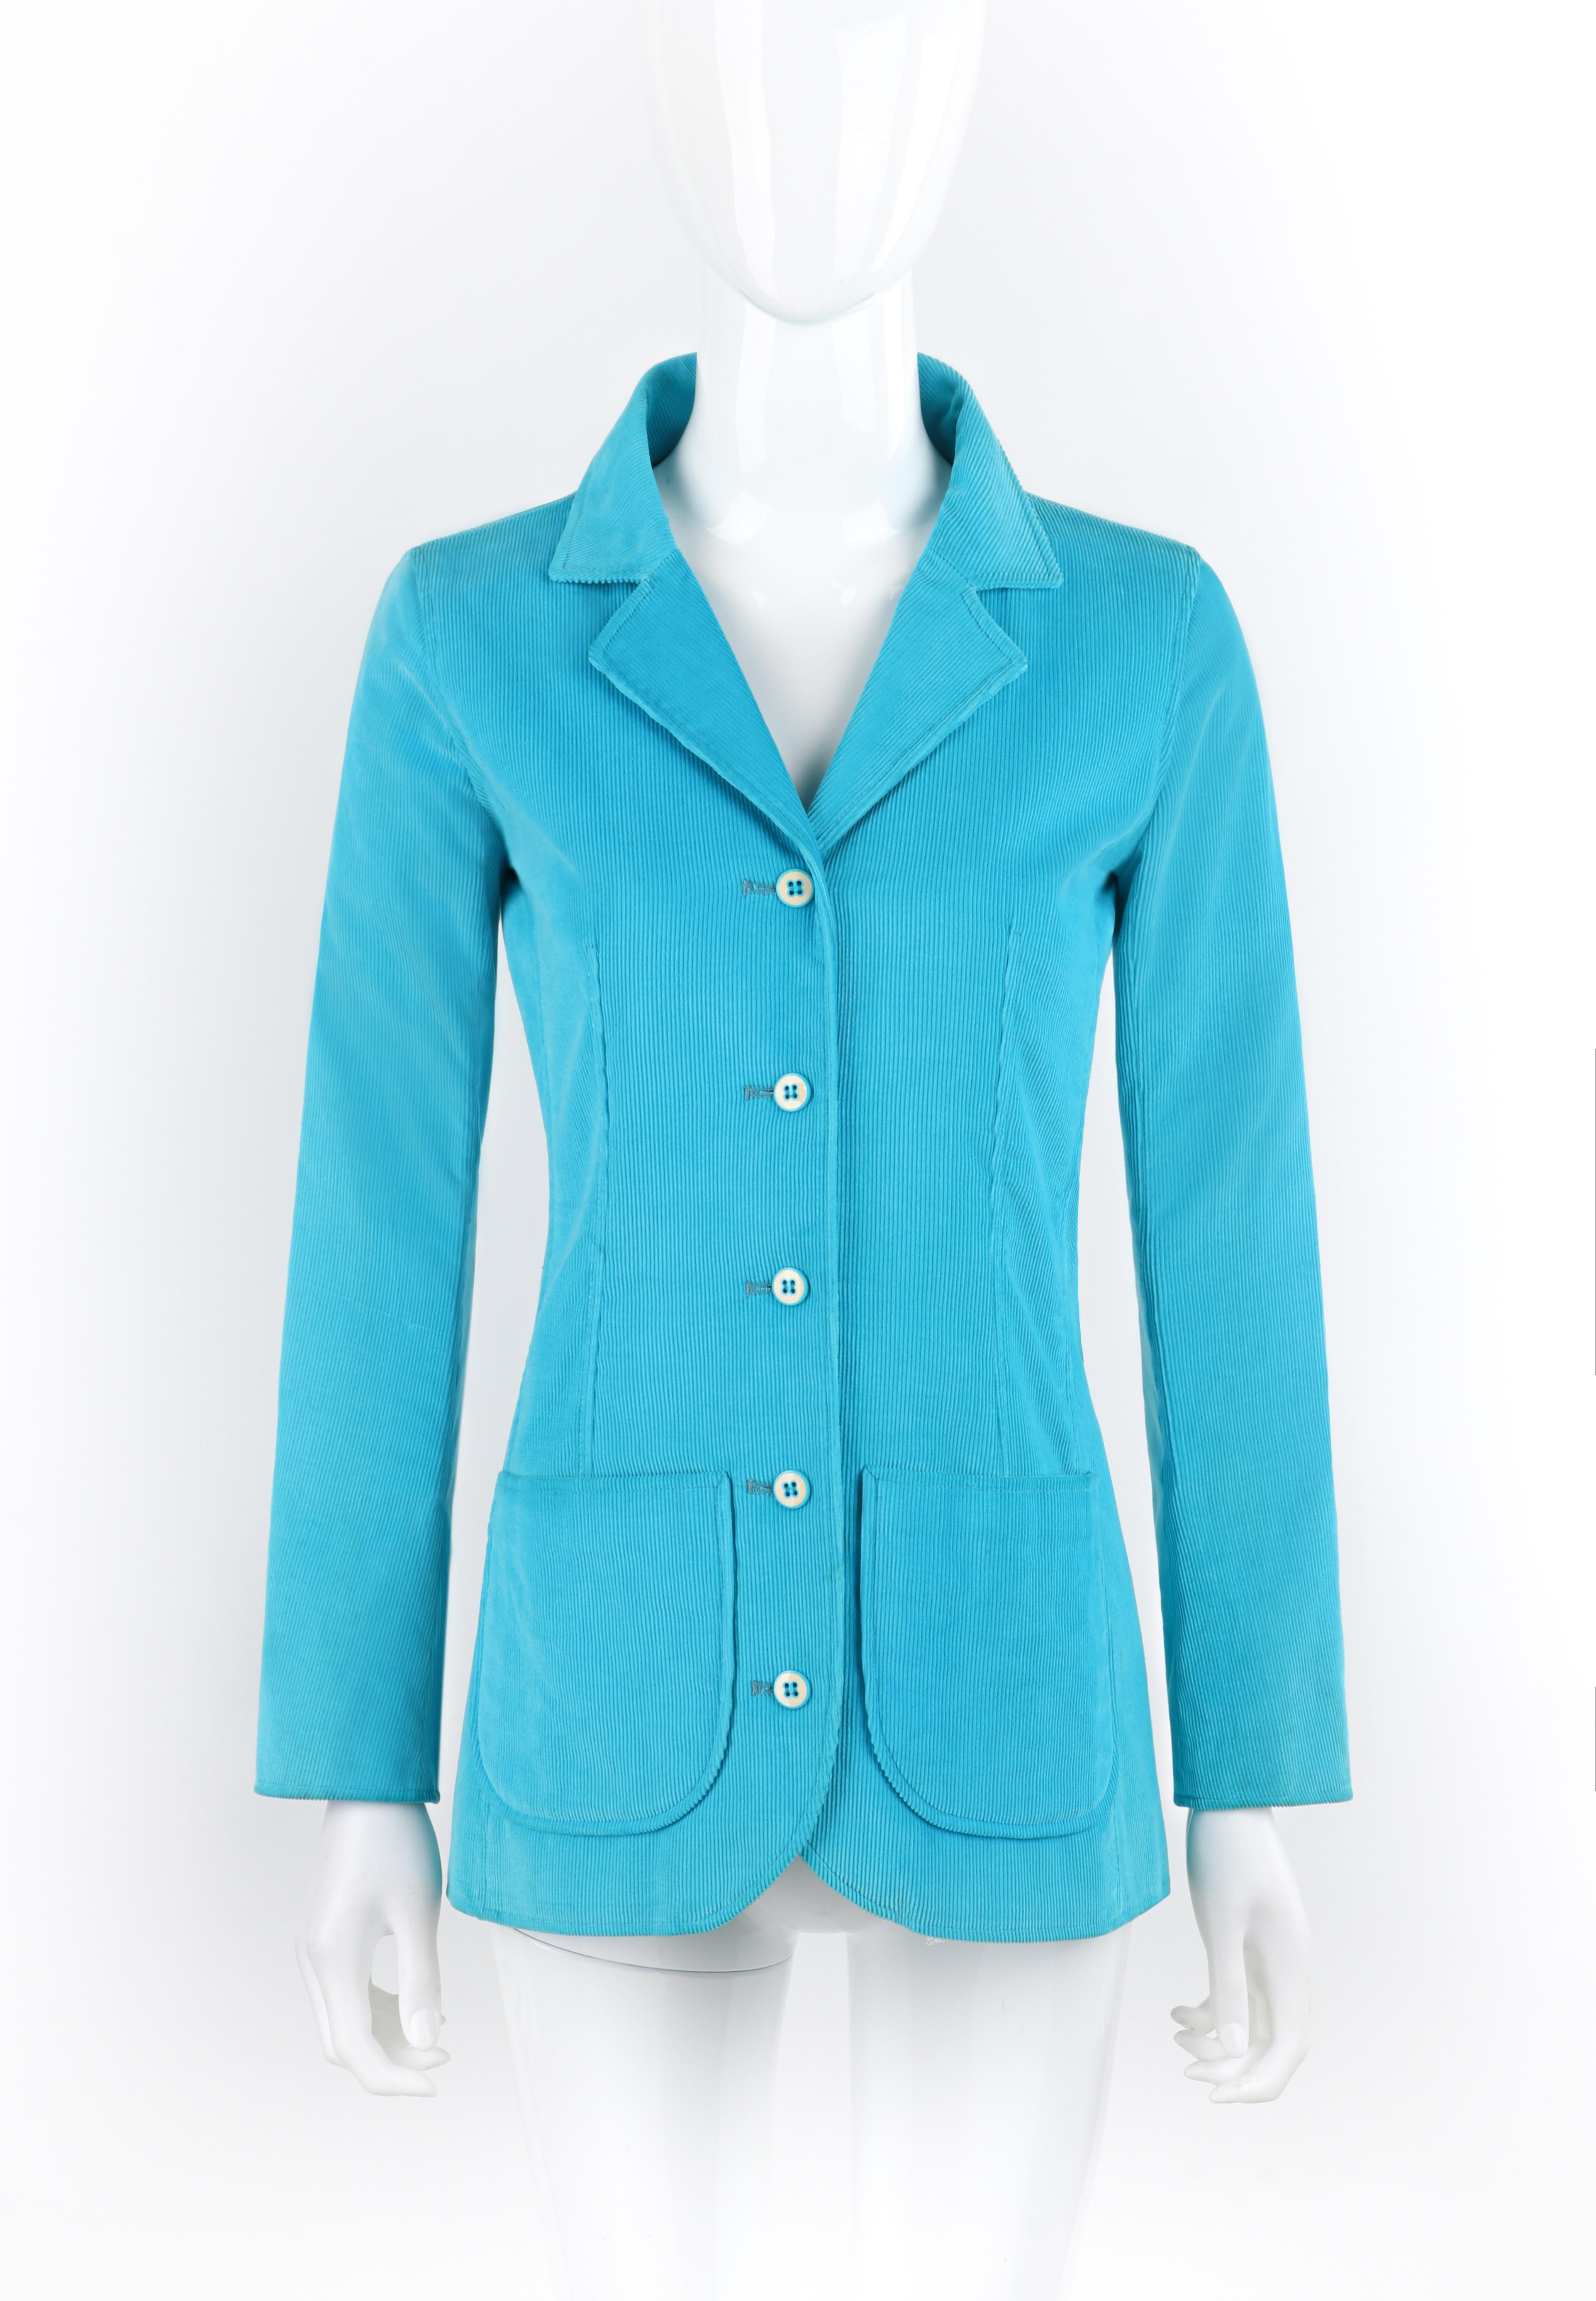 Brand / Manufacturer: Courreges
Circa: 1970s
Designer: Andre Courreges
Style: Blazer
Color(s): Shades of teal, white
Lined: Yes
Marked Fabric Content: 